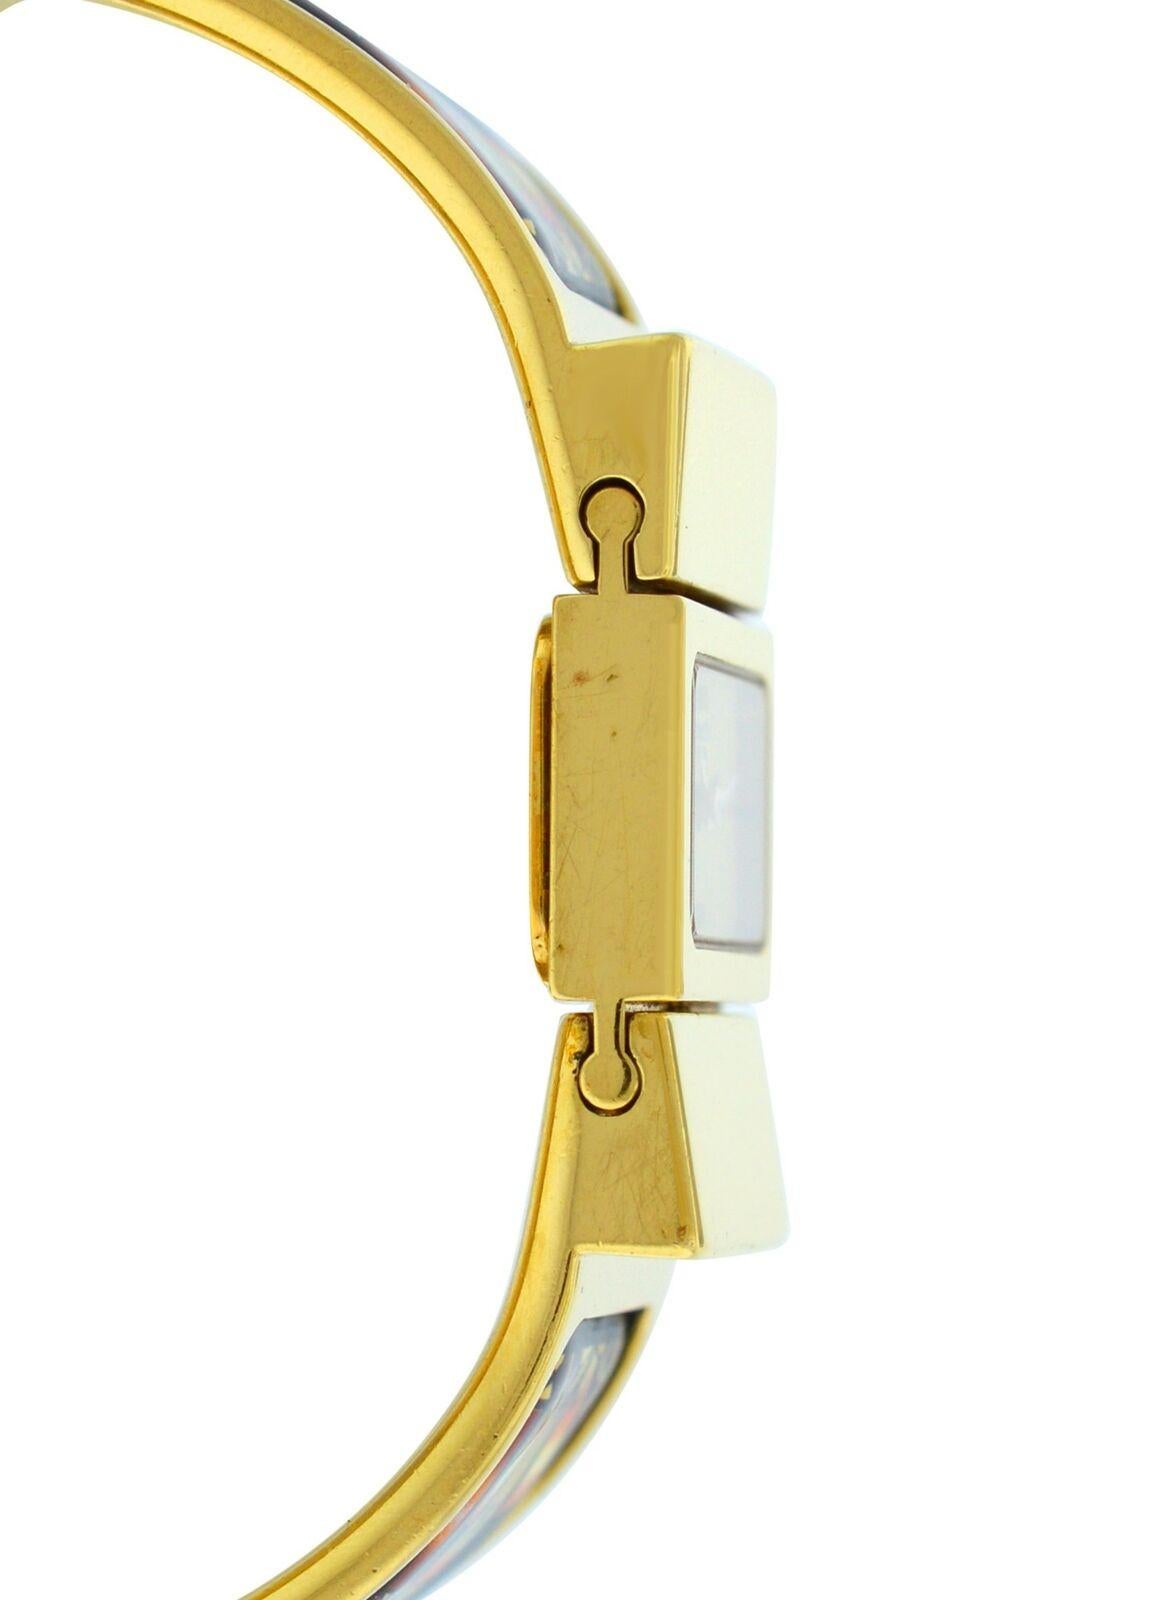 Hermes Paris Loquet L01.201 Gold-Plated Bracelet Quartz Watch In Good Condition For Sale In New York, NY